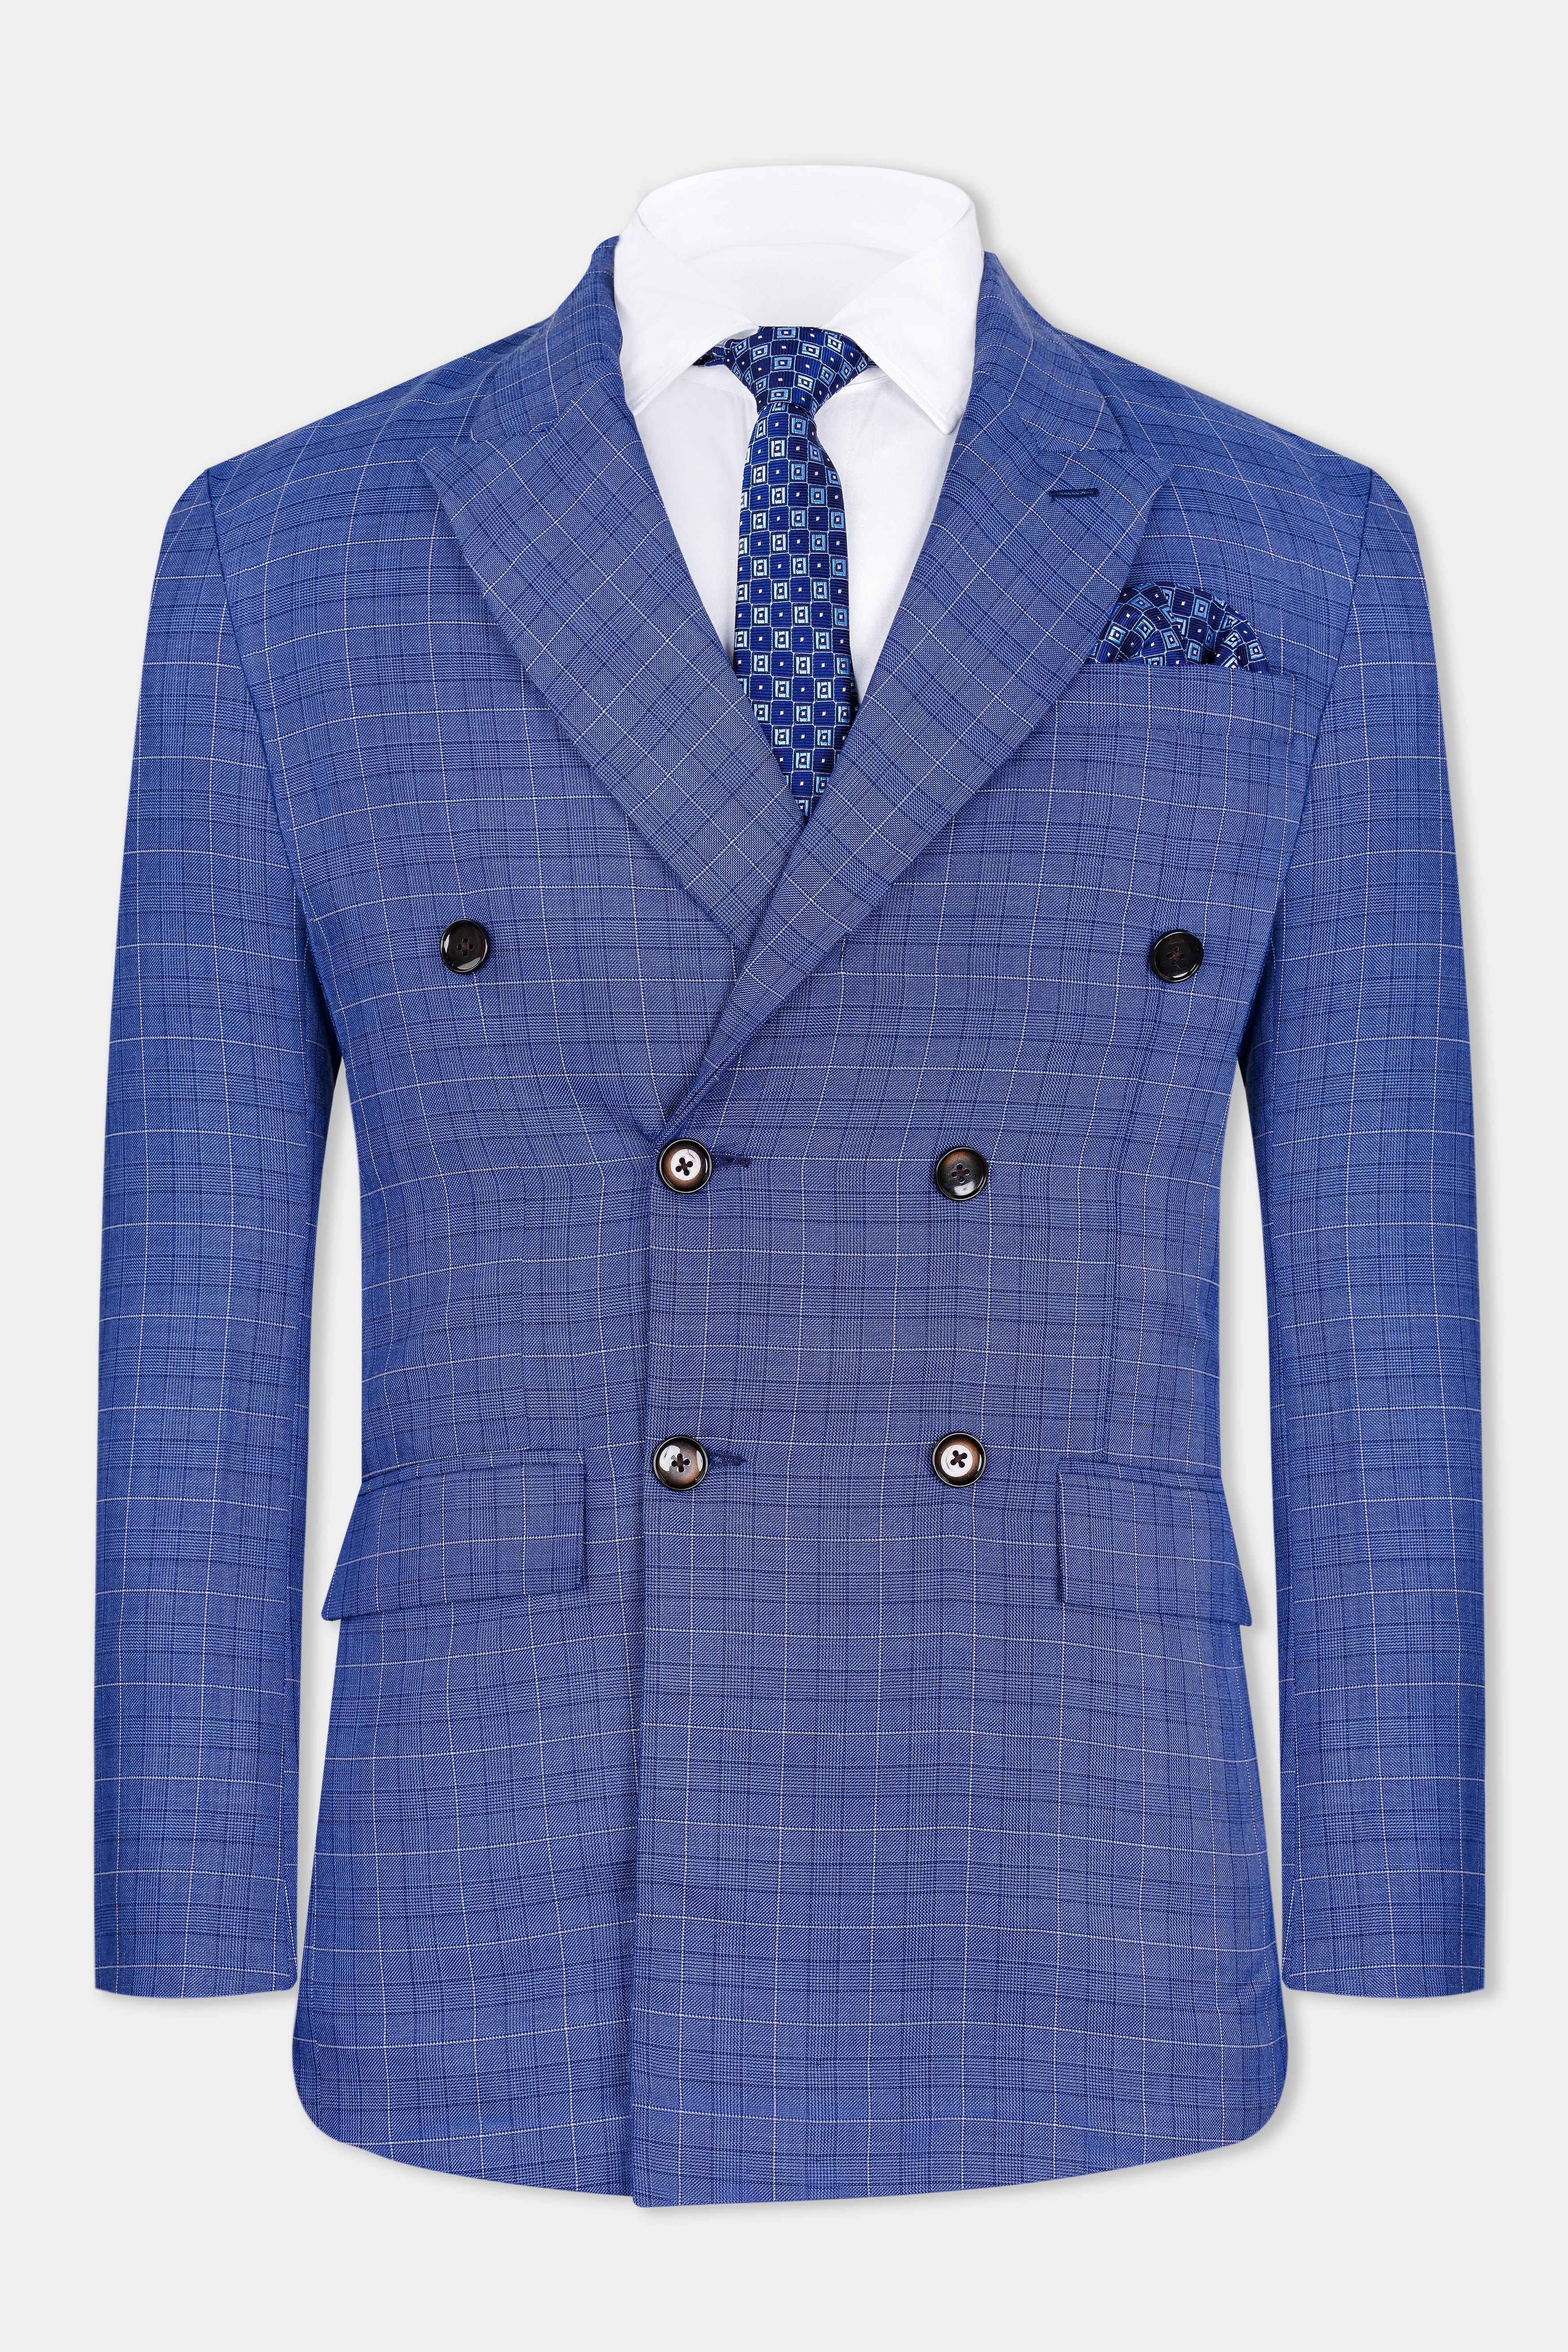 Yonder Blue Checks-Plaid Premium wool blend Double Breasted Suit For Men.